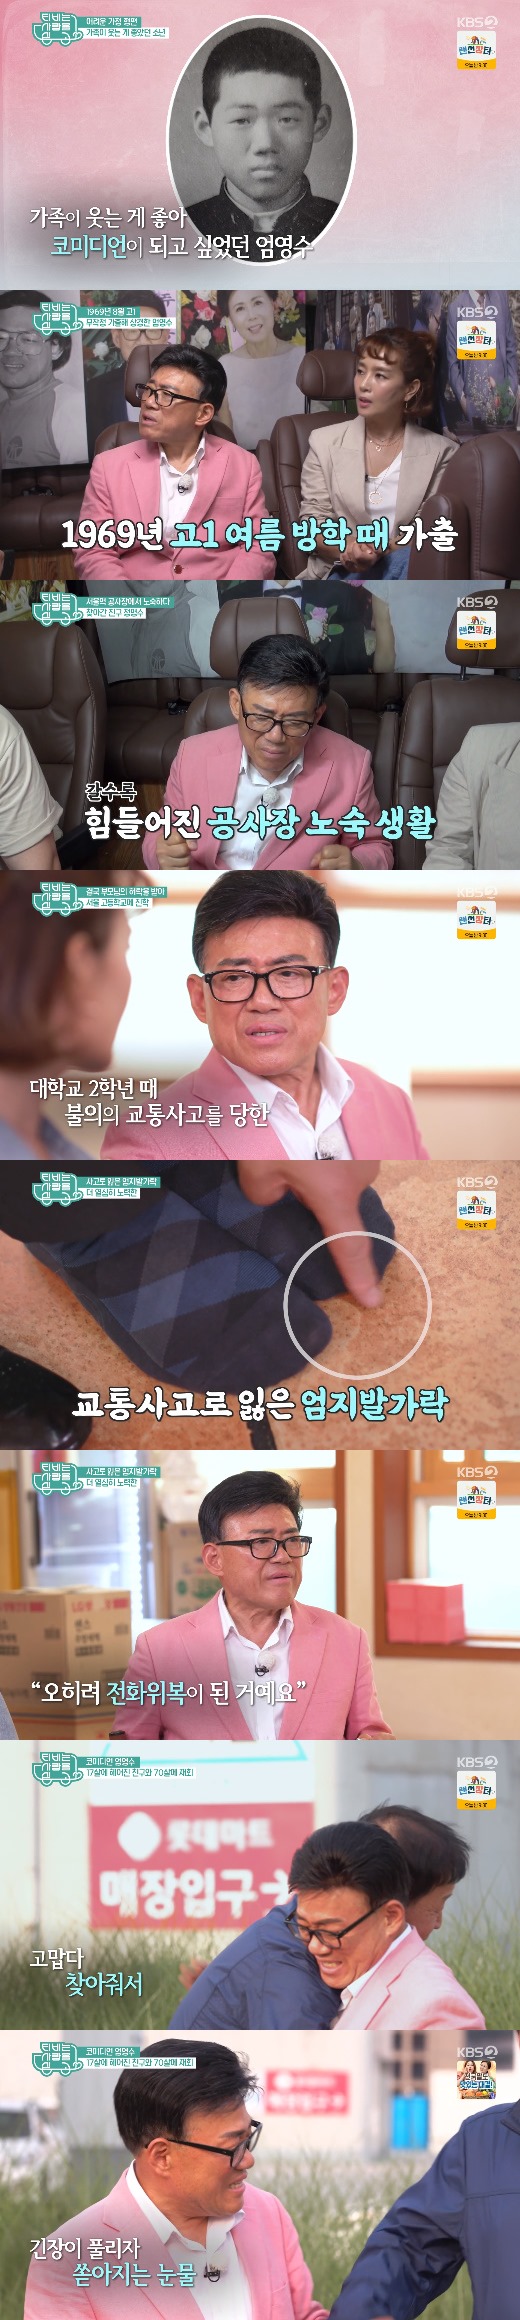 Eom Yong-su met Friend, who missed 52 years.South Koreas representative comedian Eom Yong-su appeared on KBS 2TVs TV with Love, which aired on the afternoon of the 23rd.On this day, MC Kim Won-hee and Hyun Joo-yup visited Honeymoon home of Eom Yong-su who marriage on February 6th.Hyun Joo-yup handed a pair of wry words for the newlyweds in the fourth month of marriage, and Eom Yong-su replied, It is the best gift for marriage celebration.The white sofa that caught my eye at Honeymoon home.Kim Won-hee explained that I live a white sofa when I am newly married, and Eom Yong-su explained that he had made a sofa to welcome a new bride.Its just that youve changed everything, Eom Yong-su said, and many people do. Eom Yong-su says that wives change sometimes, but the house is still there.Usually others live in a house where wives live and Husband packs up and goes out, so why is Eom Yong-su in the house every day?I lived in this house for nearly 30 years. MCs who saw the photo of Eom Yong-sus wife also praised her beauty.Eom Yong-su boasted that he was a movie star, model, talent and really a celebrity.Eom Yong-su has been president of the comedy association for twenty-one years, and he has been humbled by saying, Why do I vote and no one wants to do it?There must be more money than anything else, and there must be various kinds of affiliation, seniors, hospital service, funerals, and no association funds.We have 850 comedians and only 150 people are required on the air - so 700 are without work.So it is difficult because the chairman has to raise funds. Every single bridge is connected, but there is the only one who doesnt get caught on my radar, said Friend.When I ran away from high school and came to Seoul, I had a friend named Chung Myung-soo who welcomed me so warmly and gladly and took care of me. I ran away from home as soon as I entered high school thinking I should go to Seoul, and I was unfamiliar with coming to Seoul, and I did not know how to get through it.I went to the Friend because I had nowhere to go, and the Friend came to Seoul to realize his dream, but he was going to work because he was not able to do it.I ate for about ten days, put him to bed, and gave him pocket money, and he didnt tell me to go, and he was worried about me, What do you do? I have to get through this.But you should study, he recalled.Eom Yong-su said that even if I asked the Friends, I did not know the news and said that he was probably dead. If I found it, I was afraid of it.I am 70 years old now, and if I come to dementia, I do not know if there was such a friend. I do not think it is human to find that friend once.The moment he became a comedian was also revealed: My family was poor when I was young, said Eom Yong-su, whose mother was responsible for her livelihood. My father left the commercial school in Wonsan.You have to come to South Korea to work, but you did not work like, I know the most and I know it, but I can not live more than him. And I have a lot of debt guarantees.Im not laughing at all, but I felt so good when people laughed when I was funny, thats why I thought I was going to be a comedian.Eom Yong-su, who came to Seoul when he was in high school, was homeless at the construction site and was working hard.But I went to Friend in a difficult home life and recalled that I was owed ten days.Four months after he ran away, he came to see me.If about 400 people took the test, they would have been sixth or fifth, said Eom Yong-su, who went to Seoul High School.At the end of the twists and turns, I re-entered the high school of Seoul, which I dreamed of, and went to Hongik University.I was in my sophomore year (university) when I was hit by a garbage truck, Eom Yong-su said, adding that the left big toe was cut off in a car accident.Im not good enough to do this, so I have to make more efforts. Im home, so I can read a lot of books, study, monitor, and see many works.But it wasnt easy finding Friend of Eom Yong-su: Friend renamed after his fathers last name.Eom Yong-su, who met Friend, who missed him 52 years after twists and turns, was thrilled and wept.